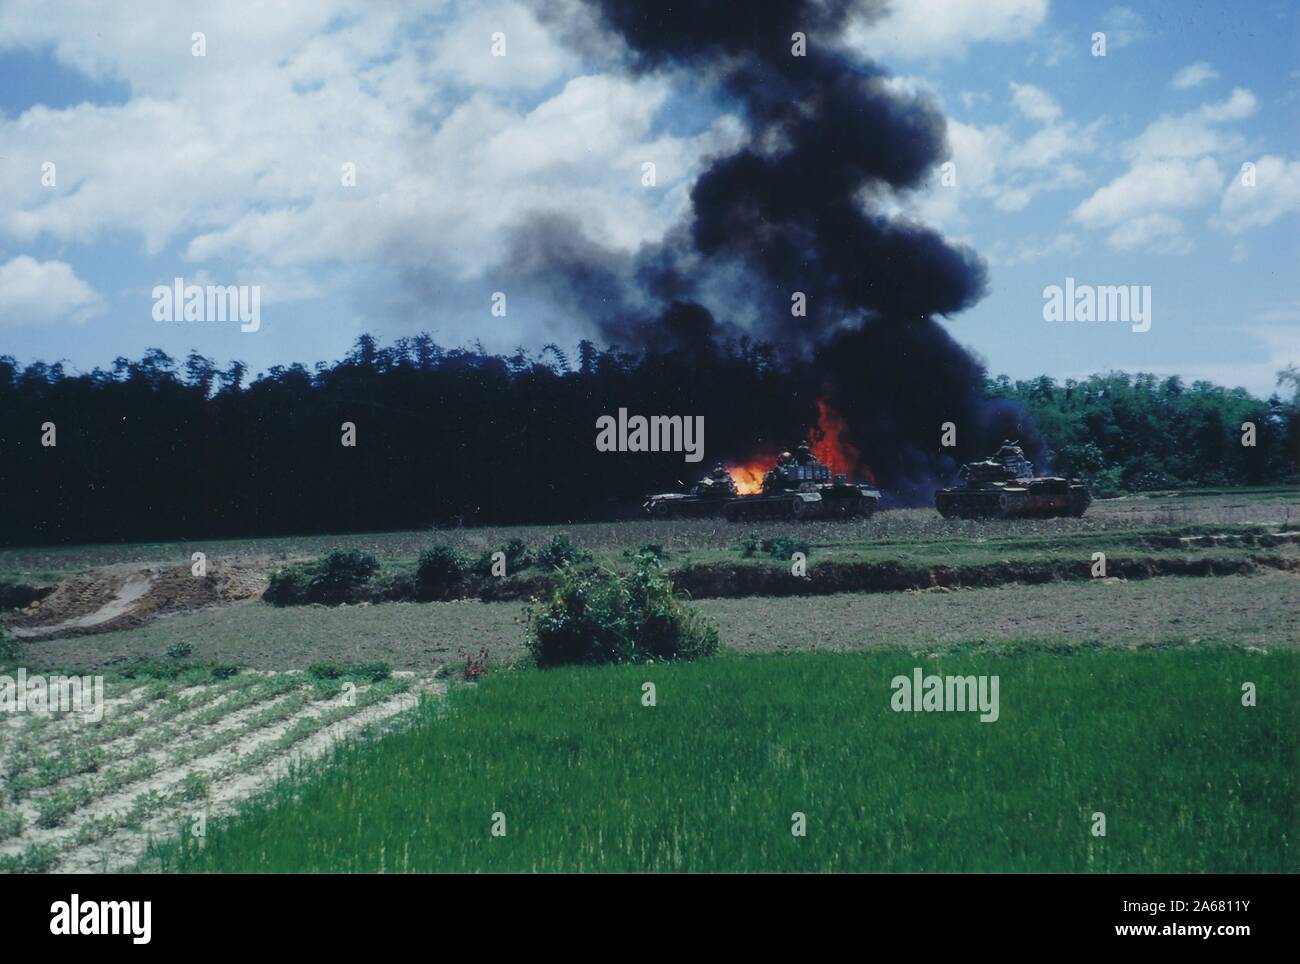 Slightly angled wide shot, across open fields, of military vehicles near a flaming and smoking explosion at the edge of a forested area, Vietnam, 1965. () Stock Photo